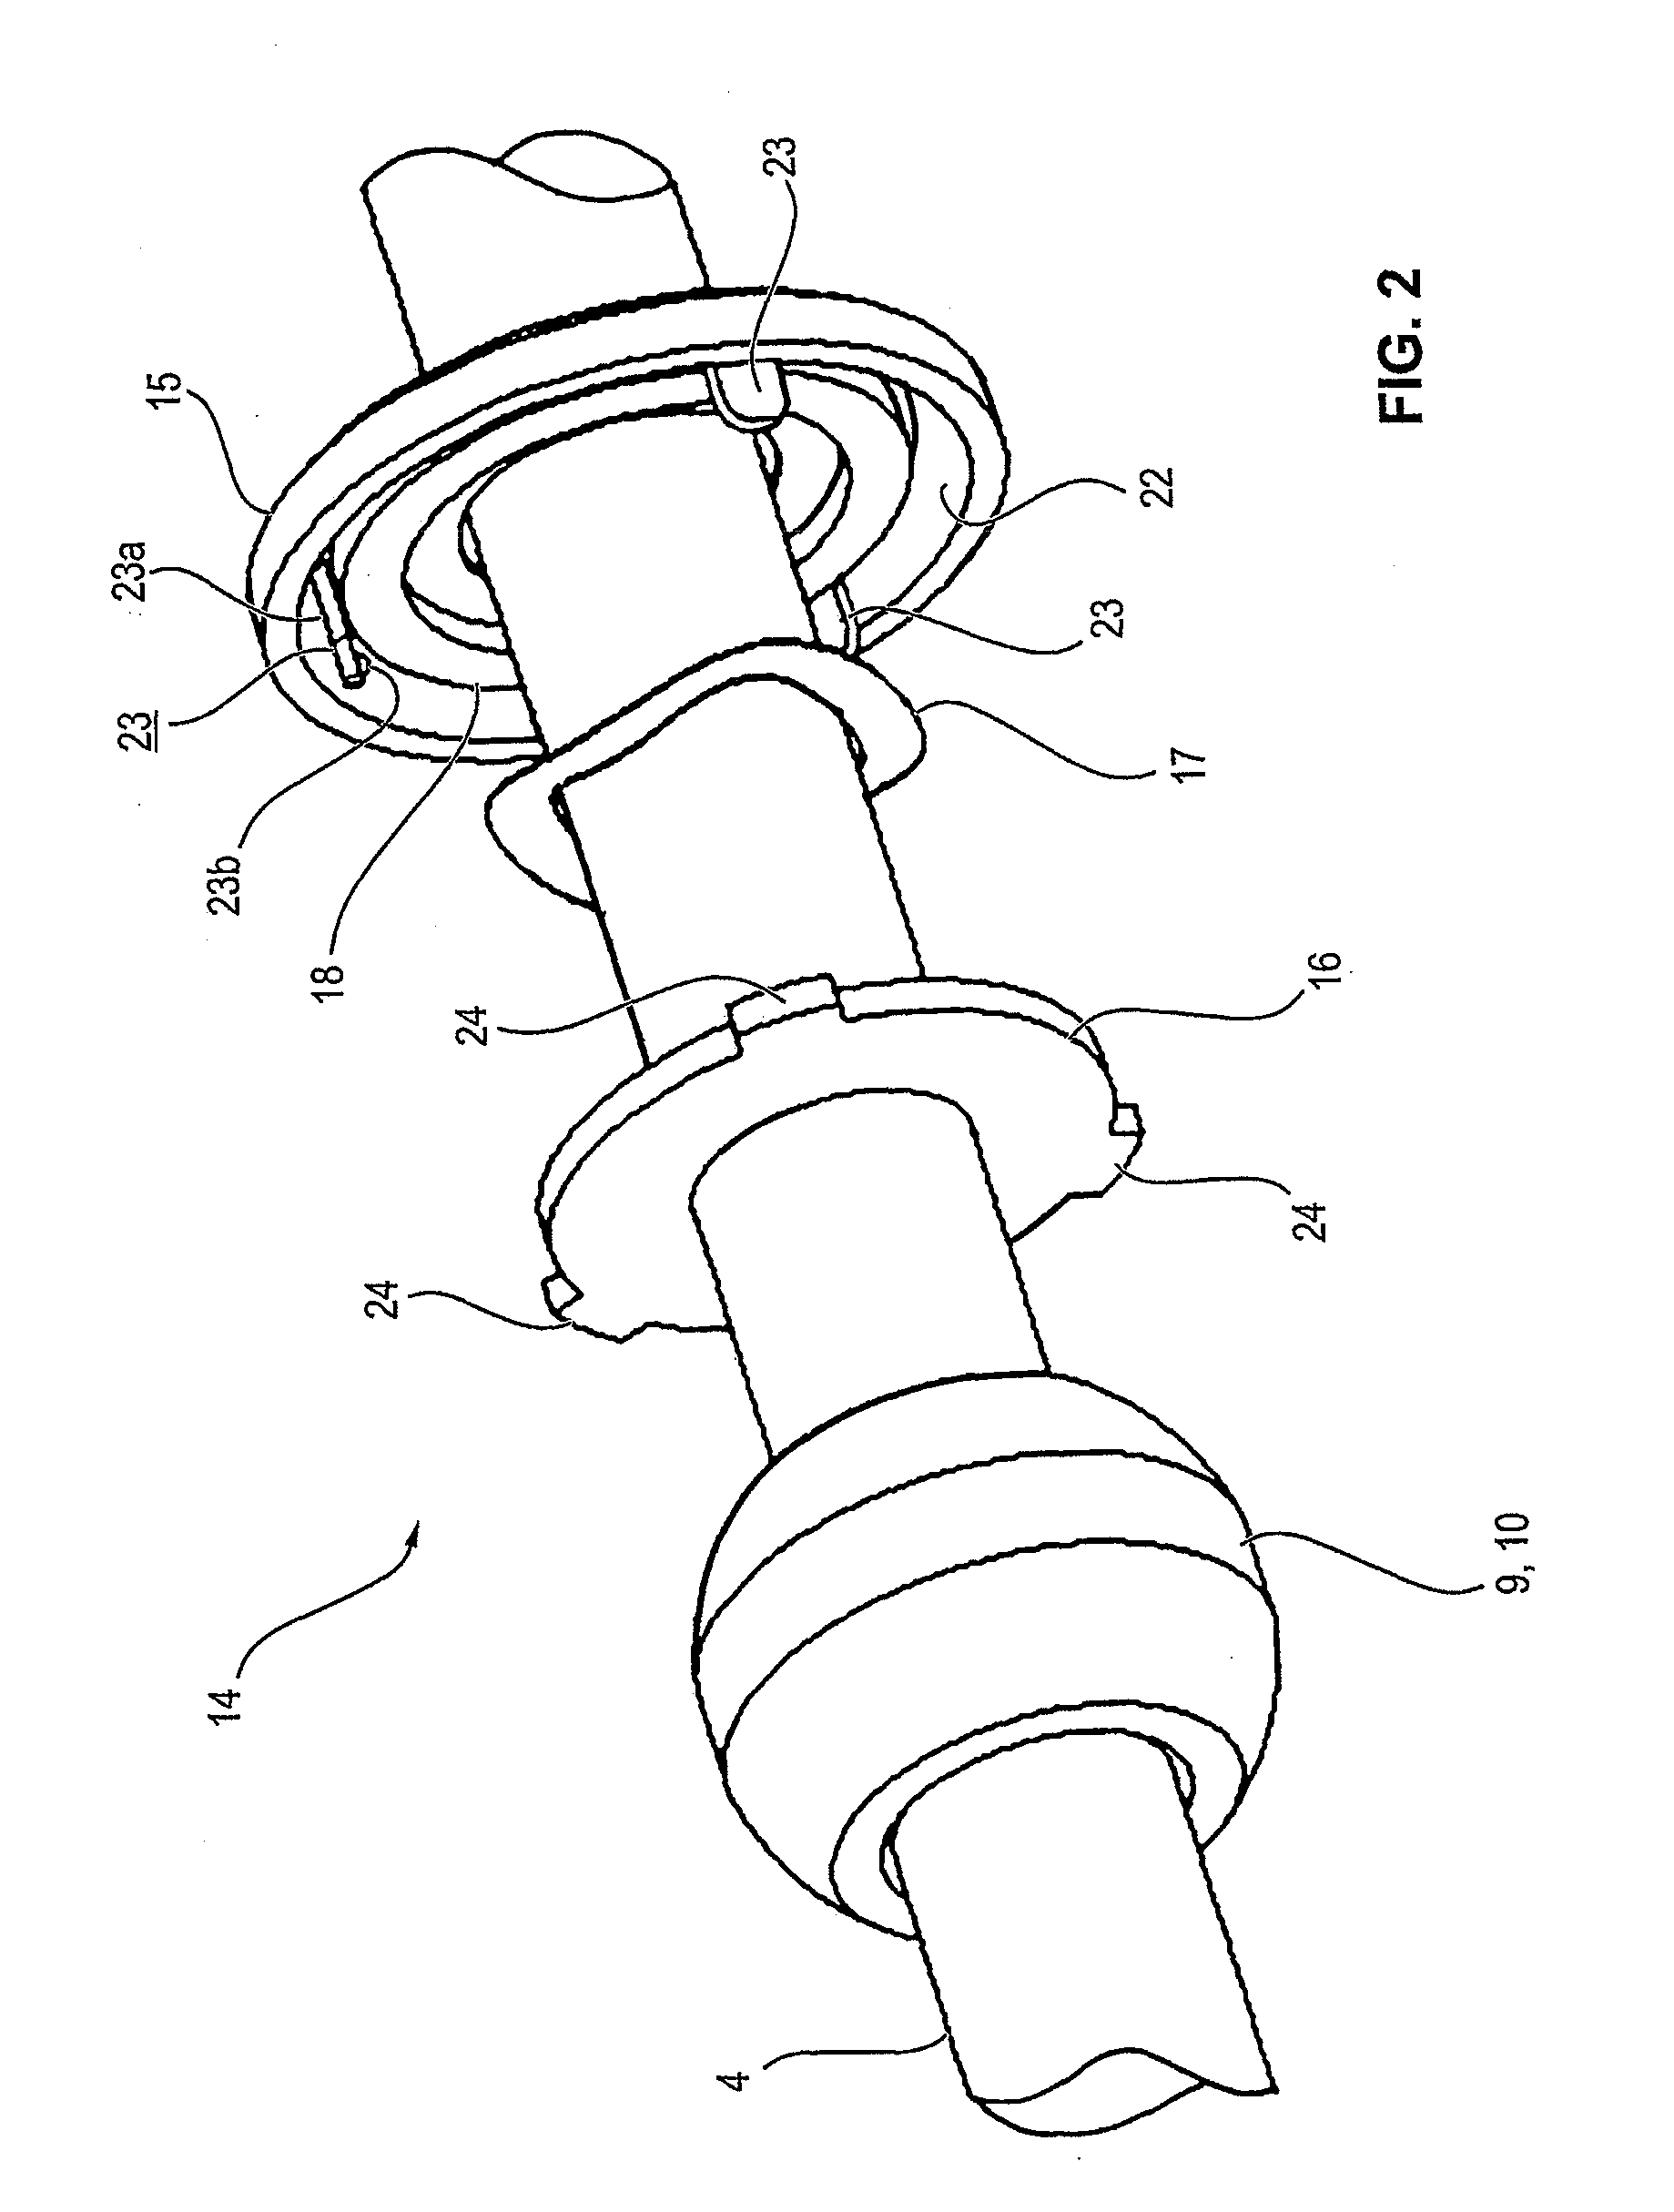 Electric motor drive, in particular fan drive